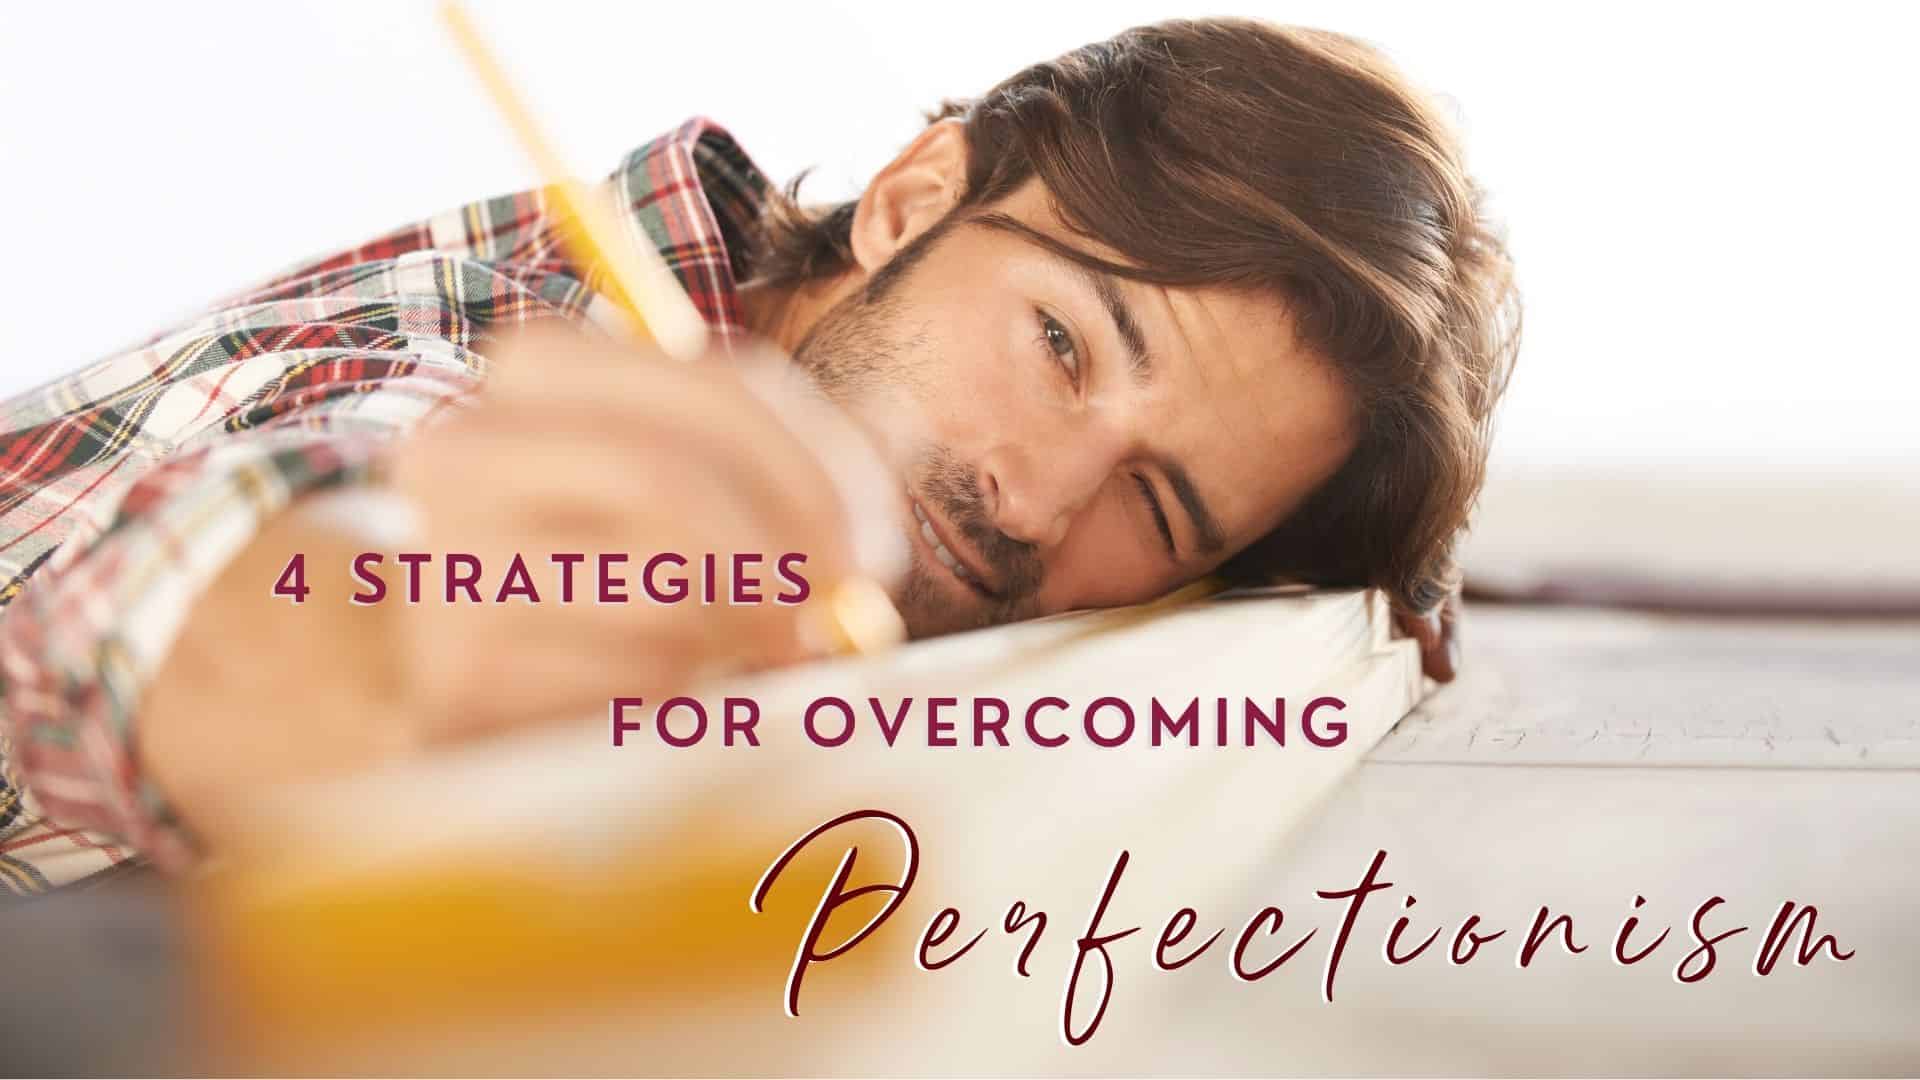 4 Strategies for Overcoming Perfectionism